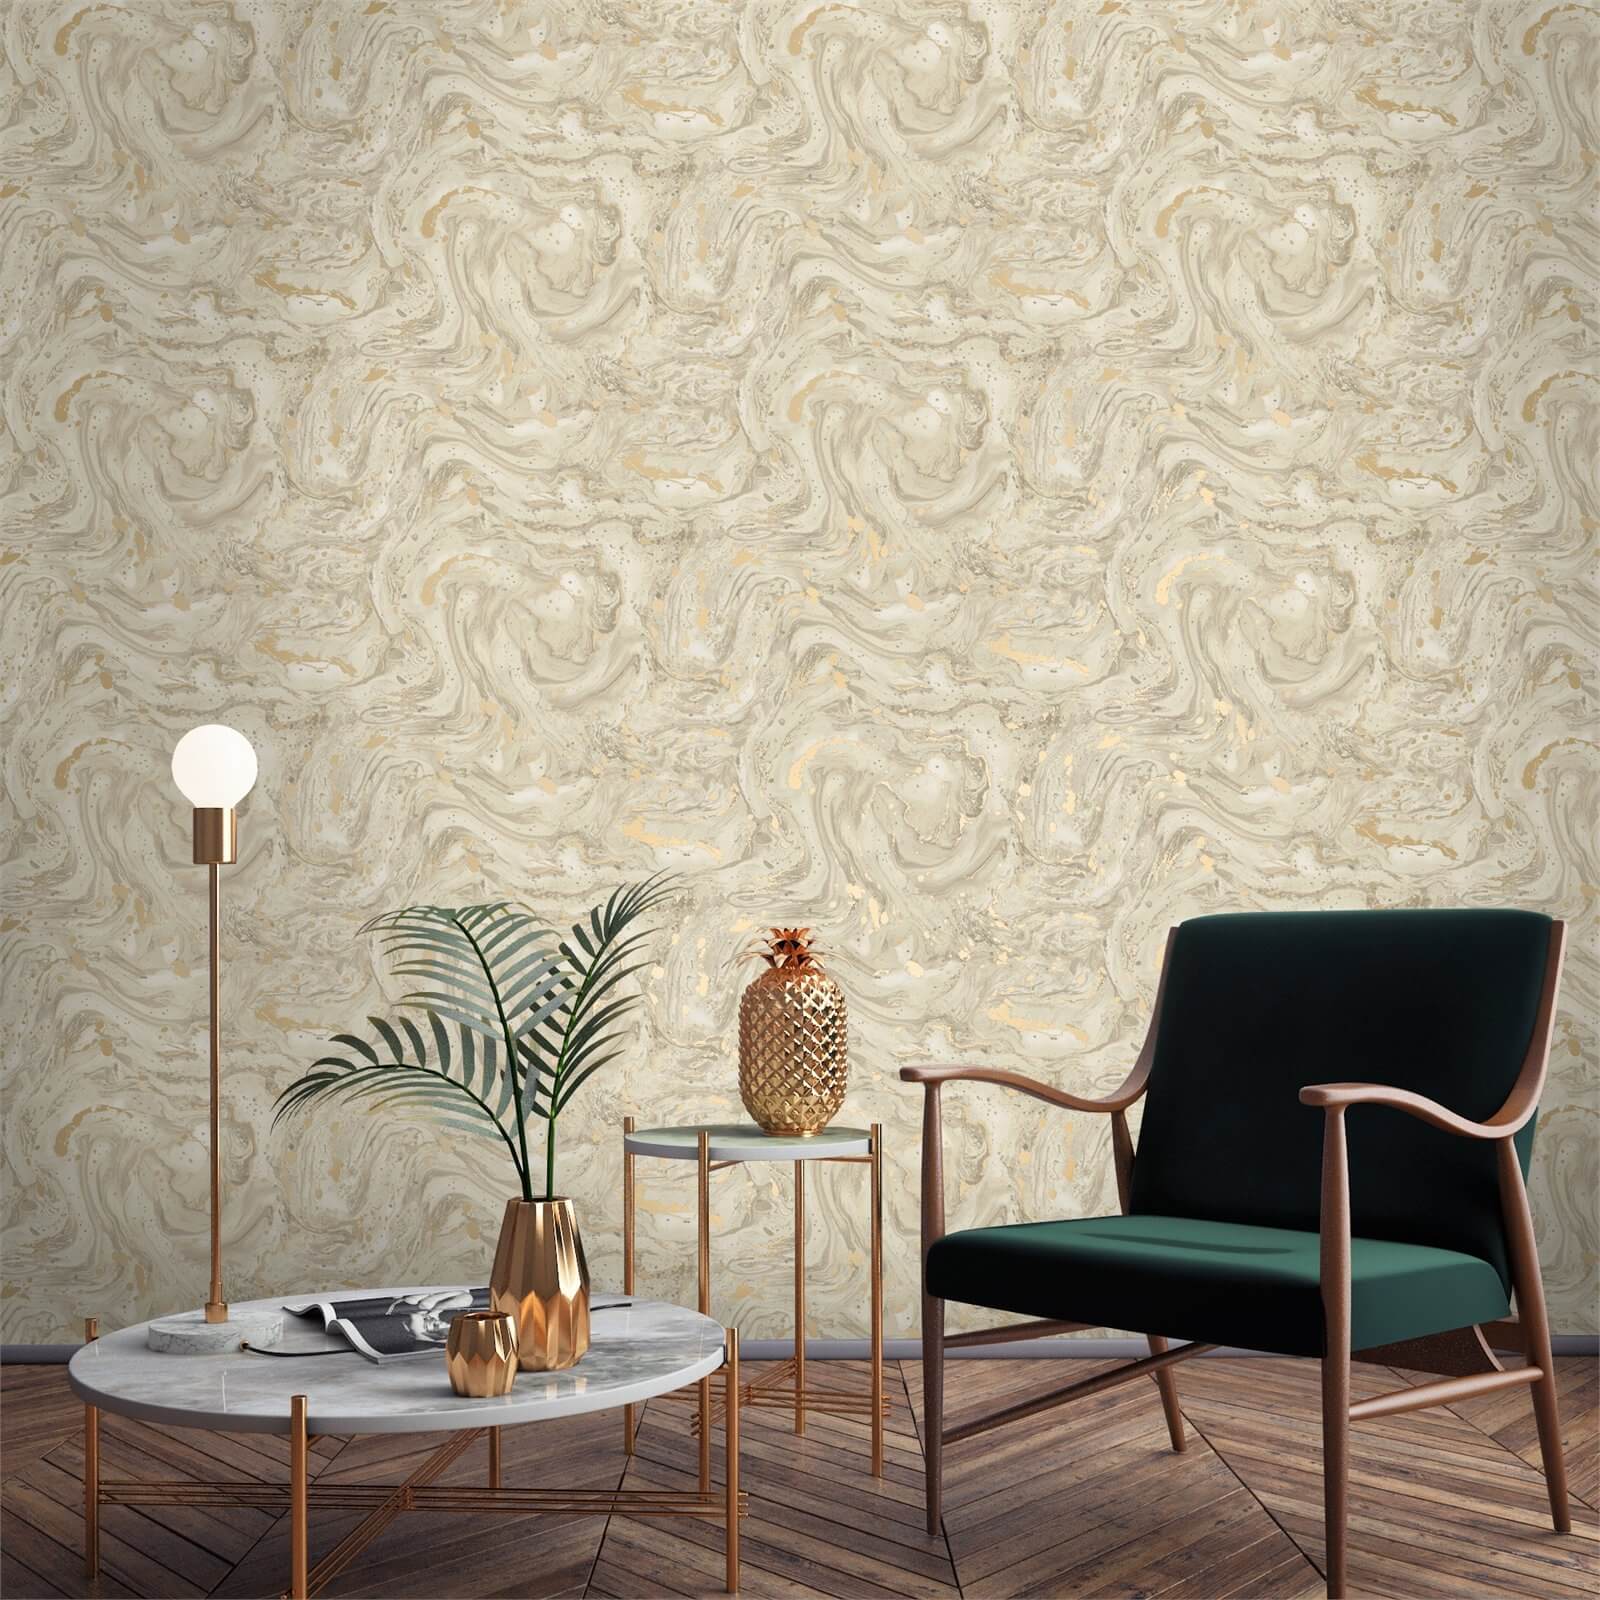 Holden Decor Azurite Marble Effect Smooth Metallic Beige and Gold Wallpaper